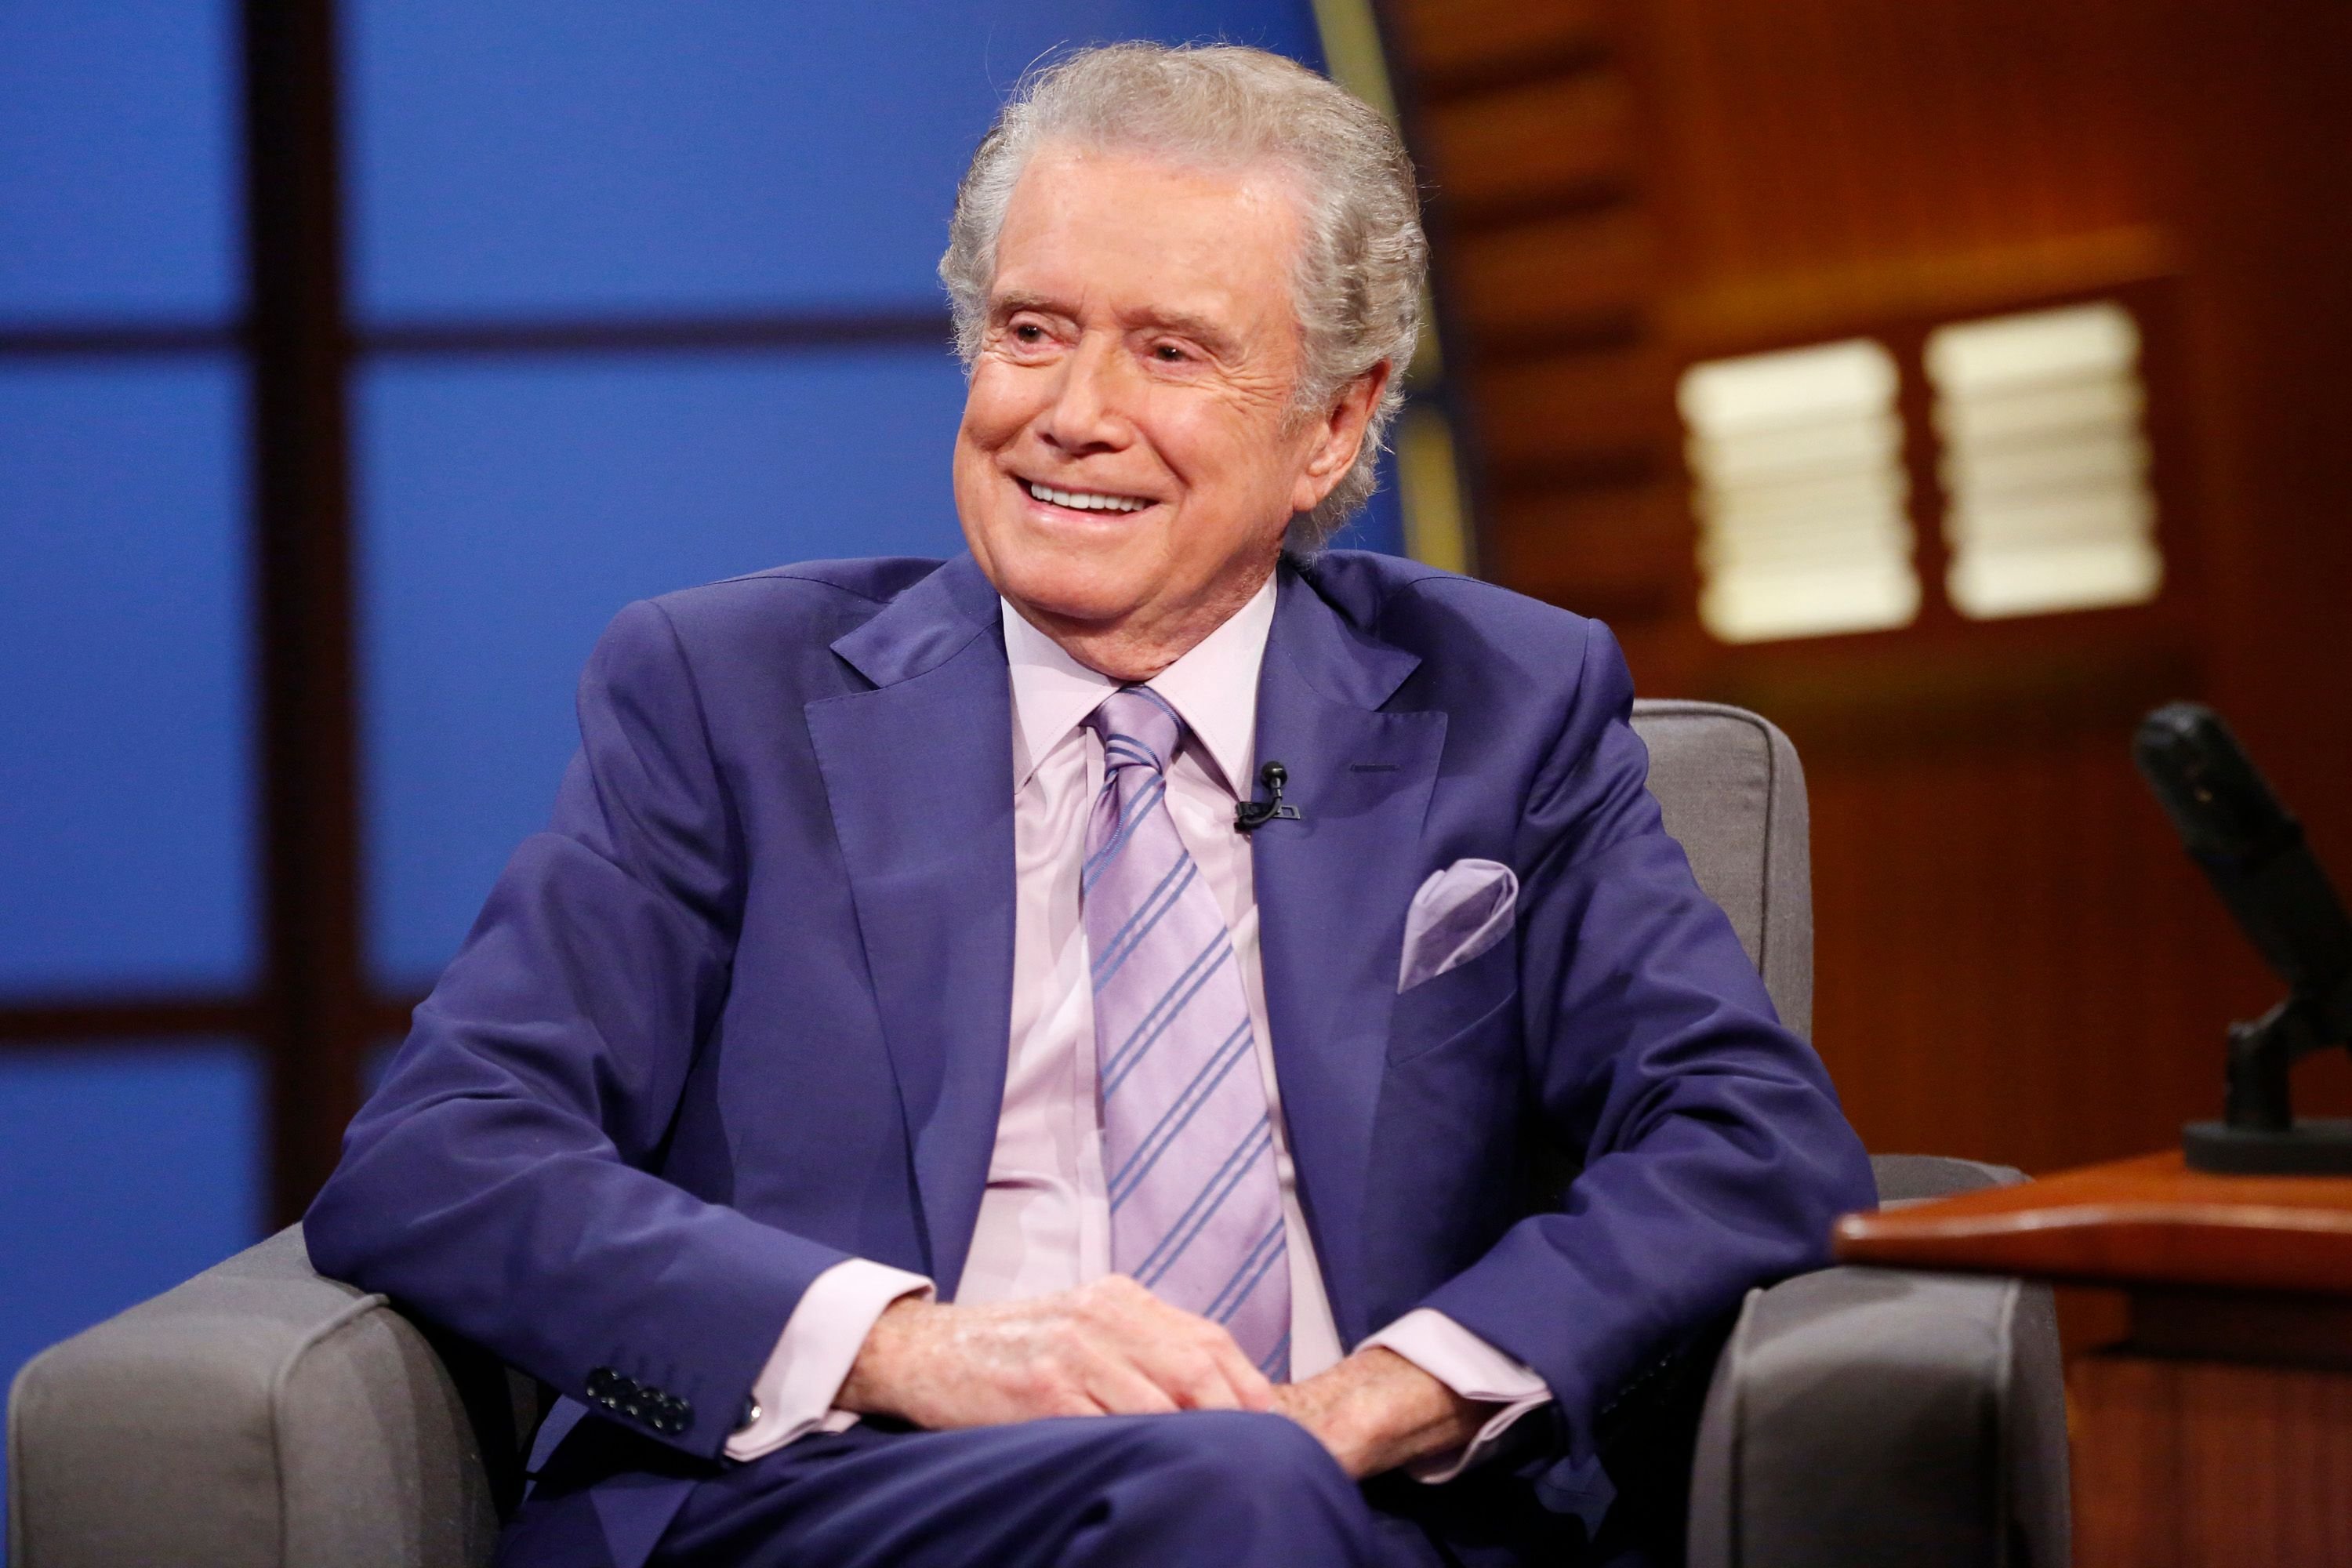 Regis Philbin at an interview on "Late Night with Seth Meyers" on July 16, 2014 | Photo: Getty Images